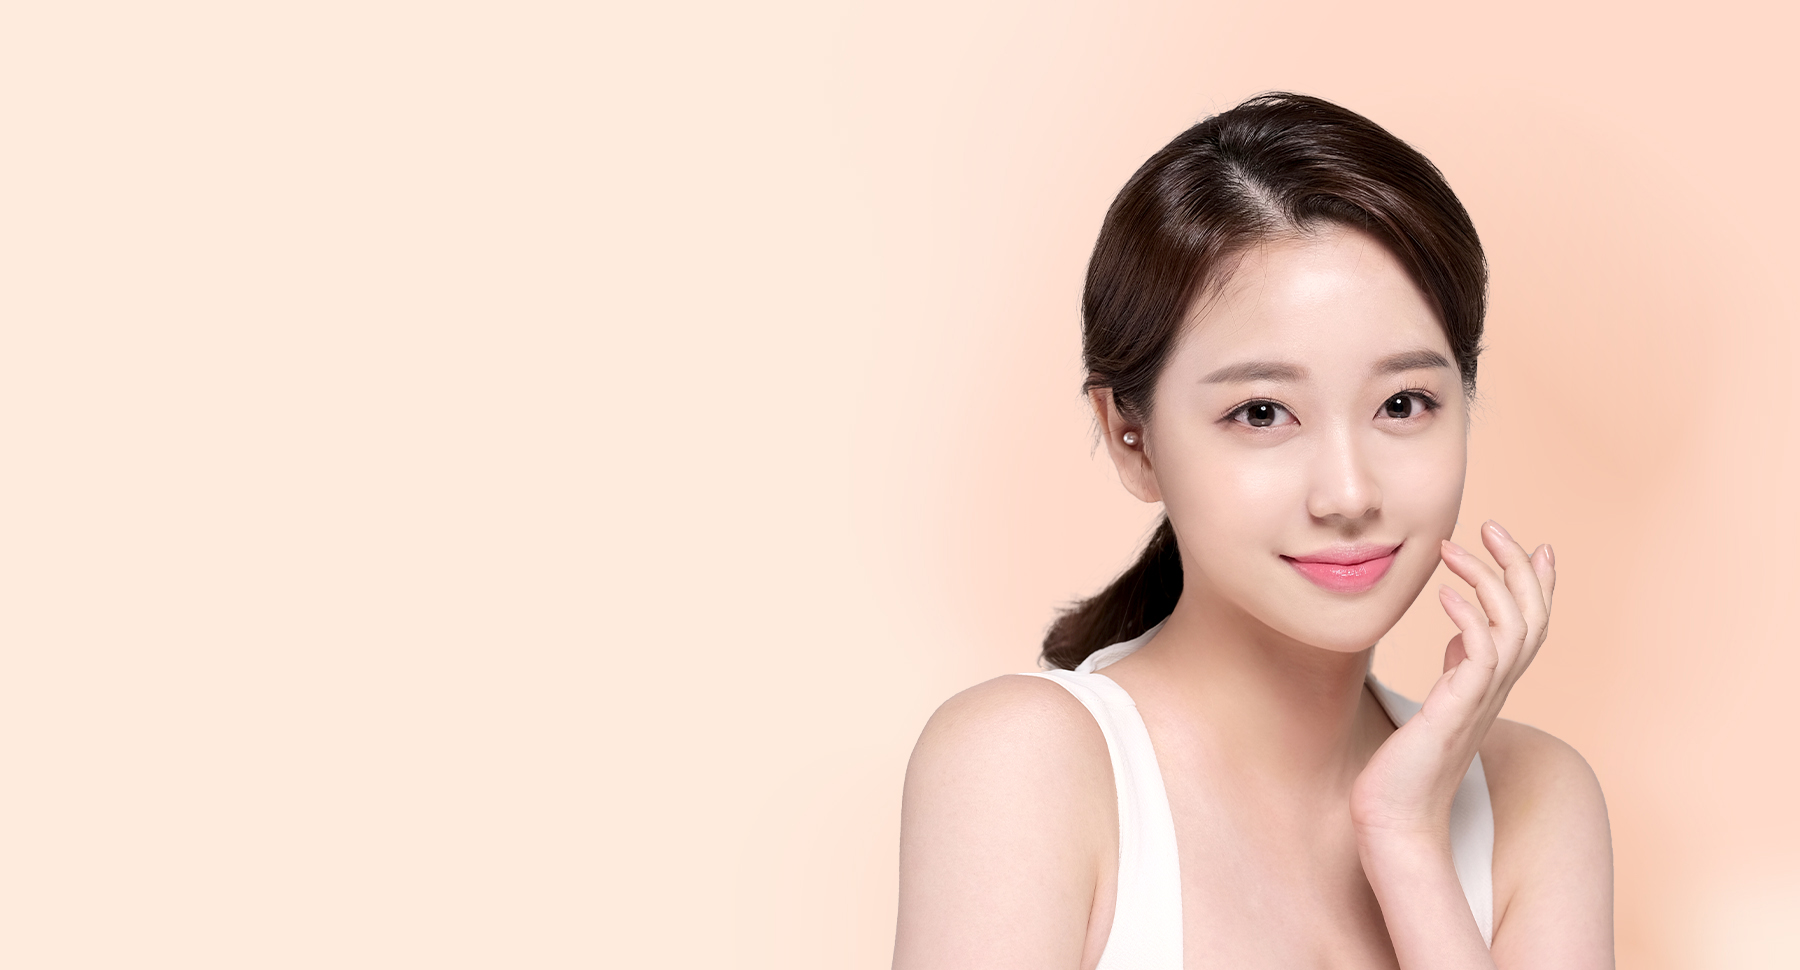 Youthful appearance with a clearer and well-defined eye shape